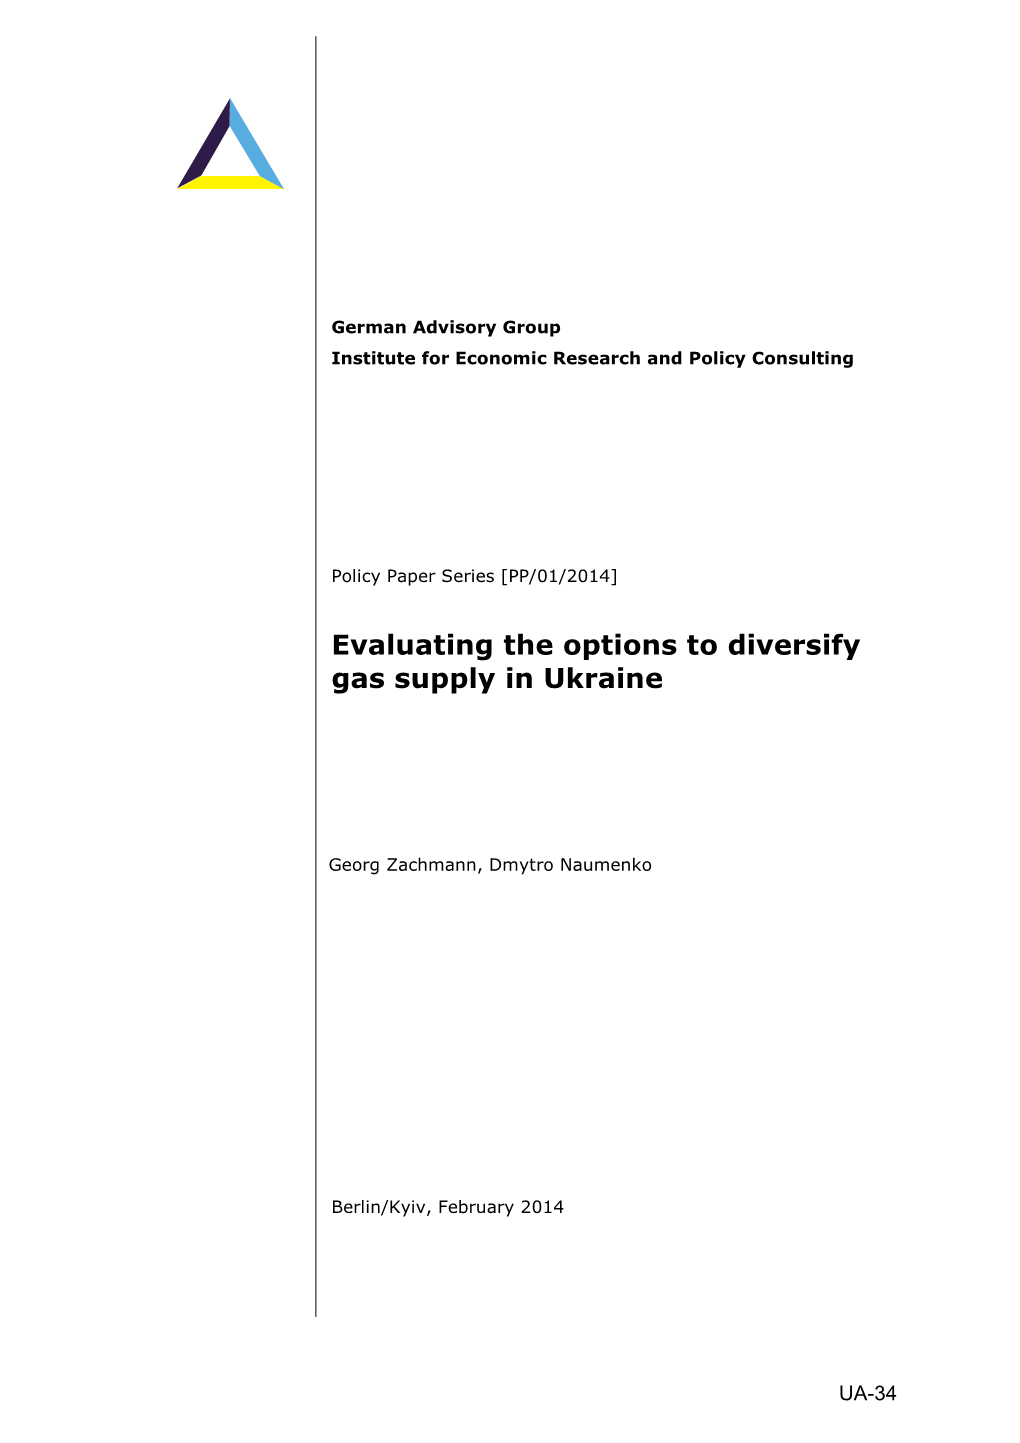 Evaluating the Options to Diversify Gas Supply in Ukraine